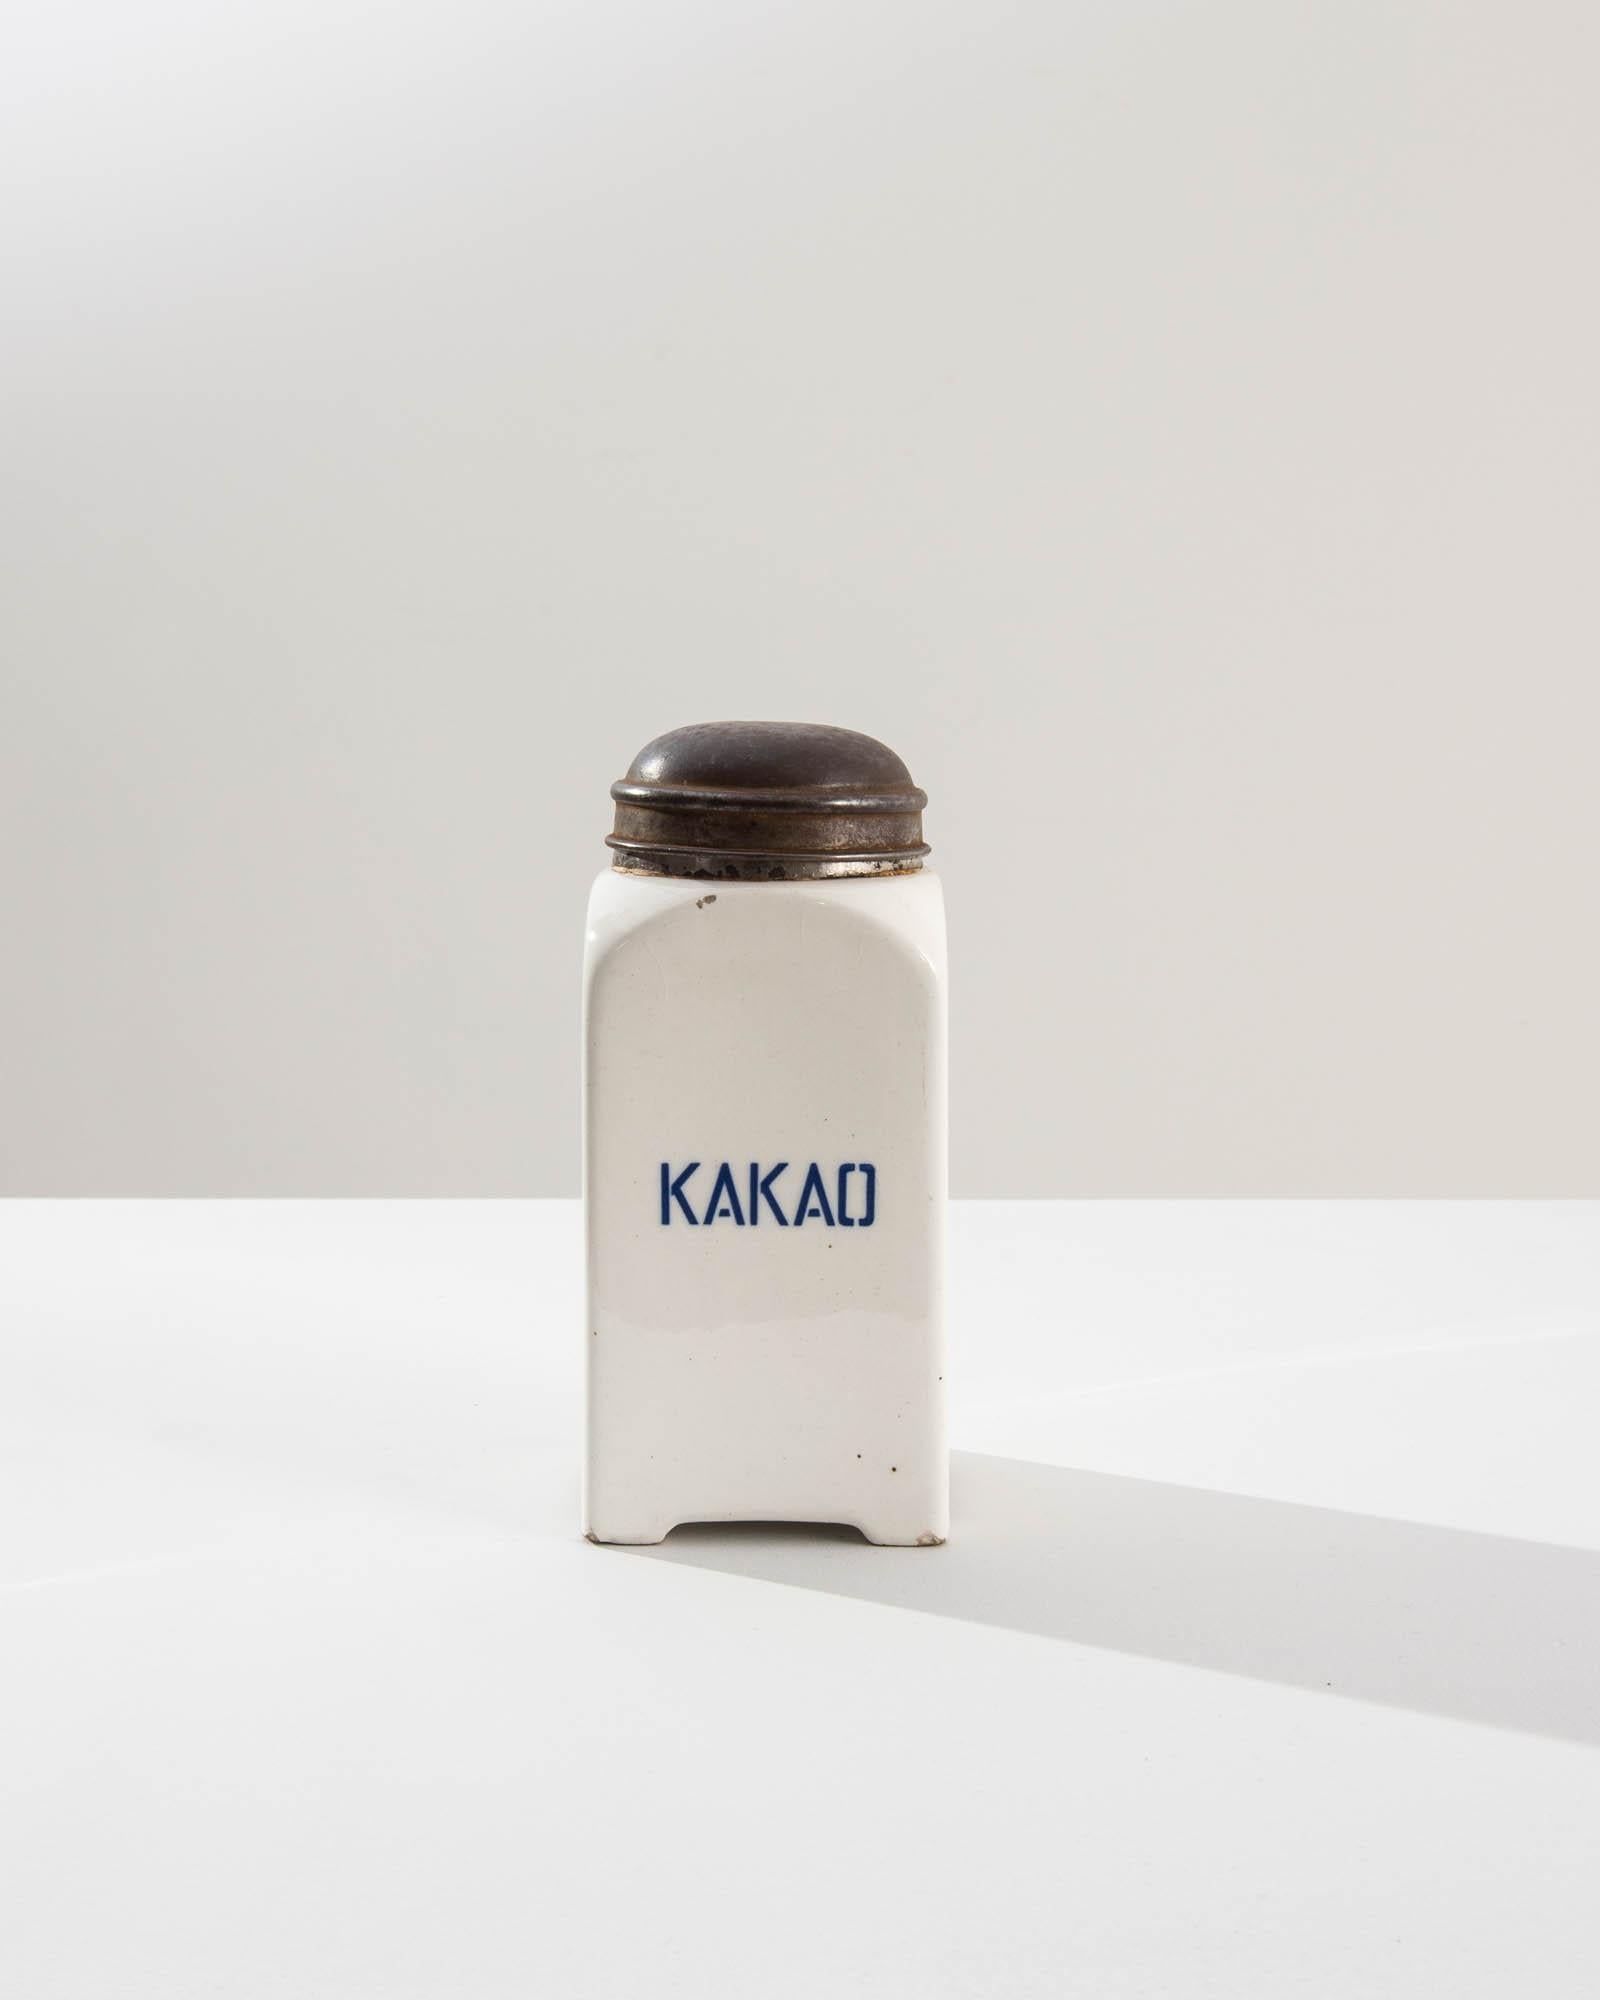 A vintage porcelain jar from 20th Century Germany, originally used for storing cacao. The slick white glaze is bright and inviting, attractive blue letters advertise the contents, ‘KAKAO.’ Subtly ornamented the metal lids feature raised ridges,